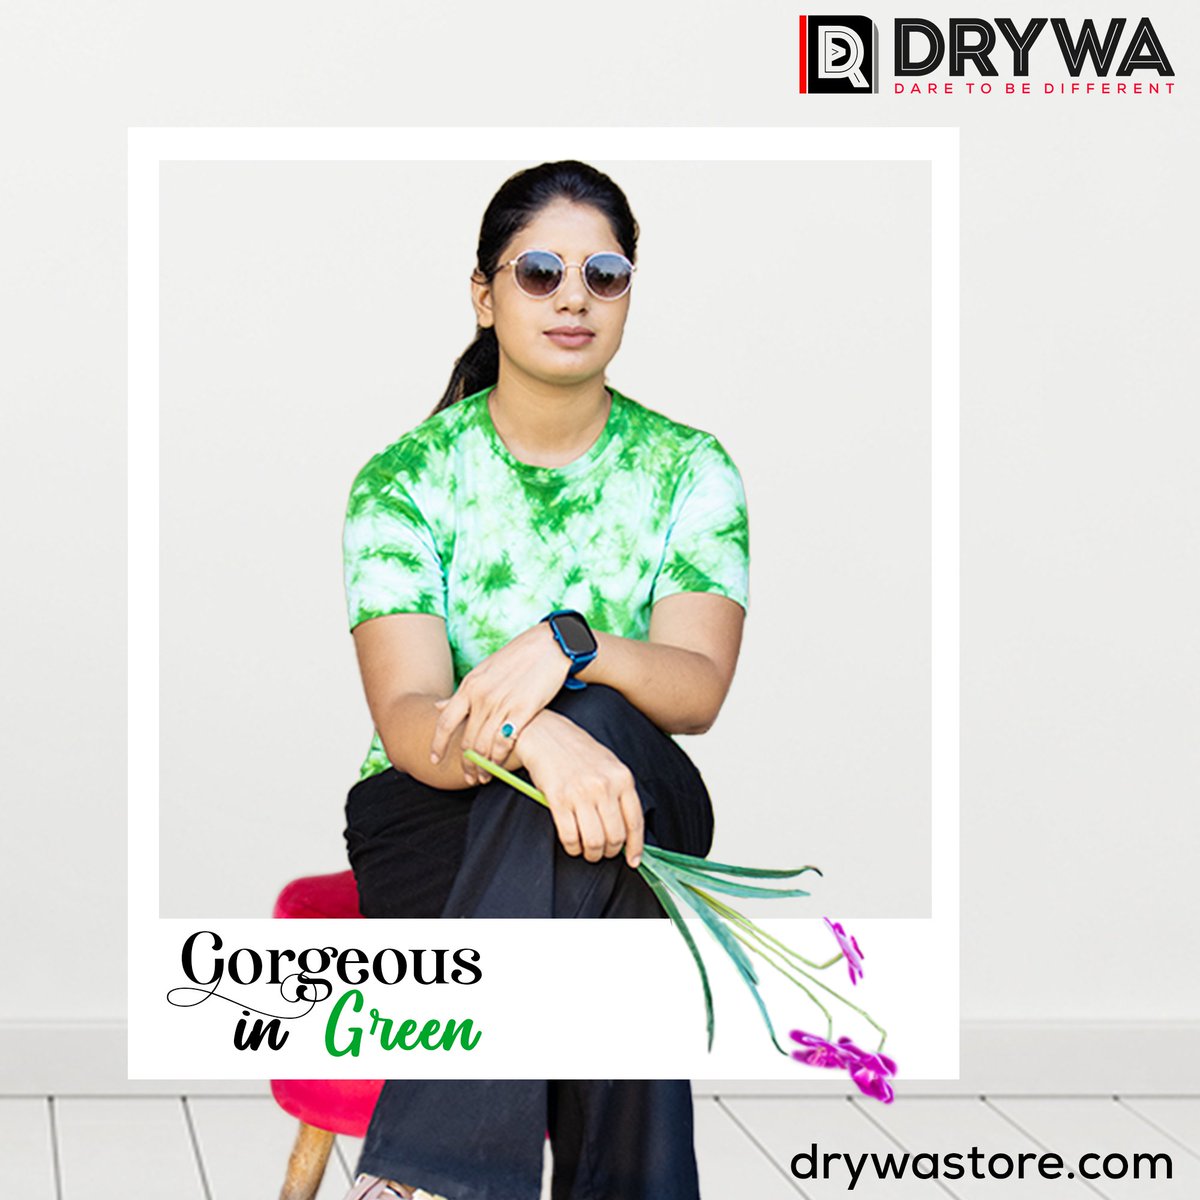 Tie and Dye new colour options for summer season.
Upgrade your wardrobe and Look Gorgeous in 💚

Model wearing -S (regular fit)
Available sizes-S-XL
DM to place your order 🛍️🛒
.
.
#tiedye #tieanddyefashion #tieandyetshirt #cottontshirts #tshirtswag #tshirtforwomen #tshirtsonline